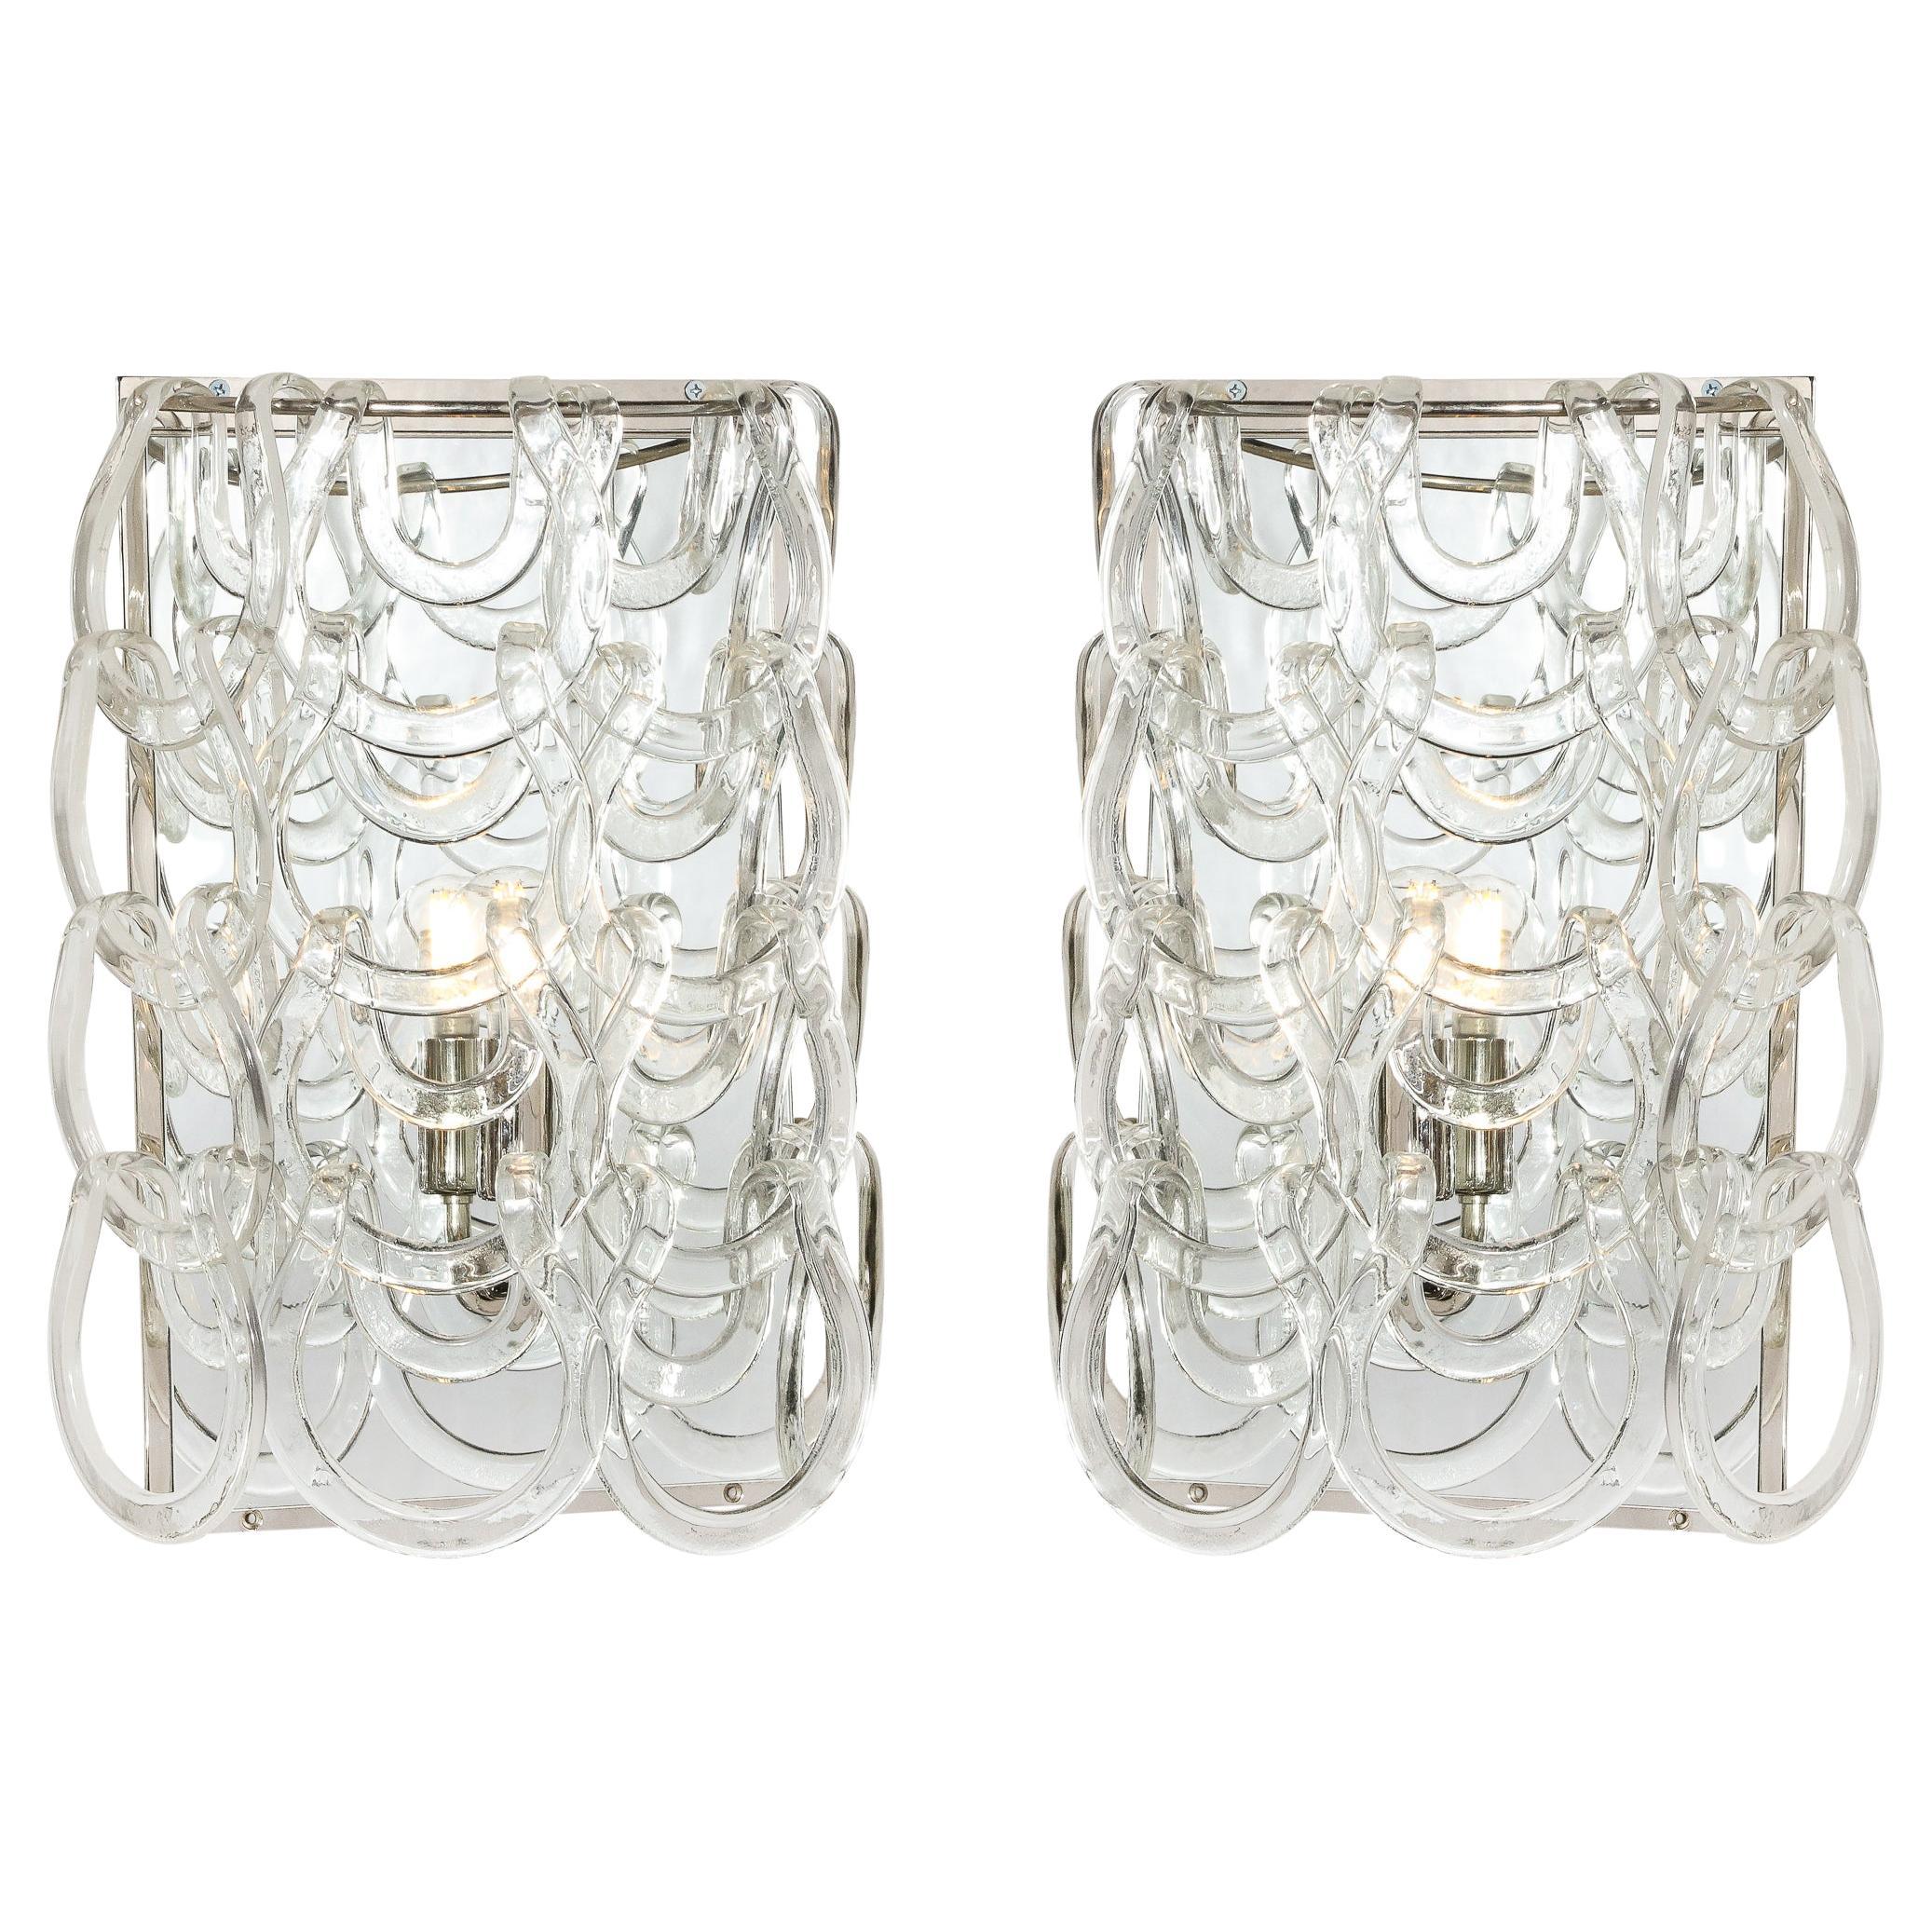 Pair of Handblown Murano Glass Sconces by Angelo Mangiarotti for Vistosi For Sale